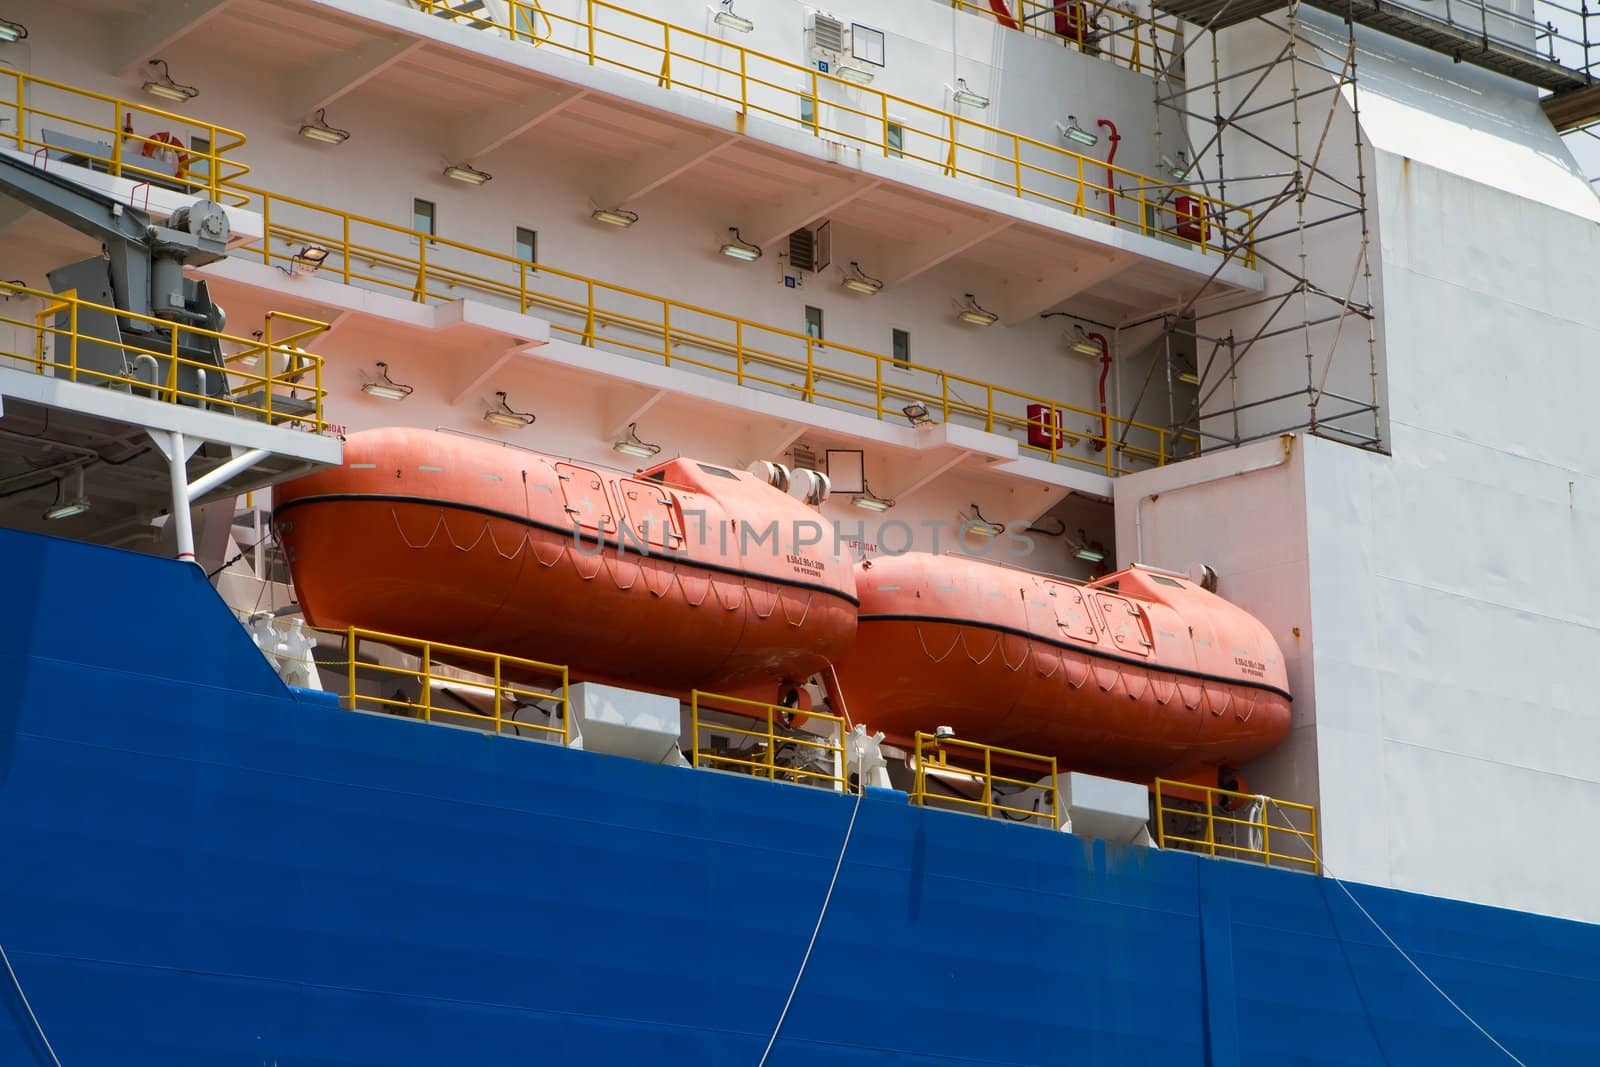 Orange survival lifeboats sit on the deck of an industrial ship.